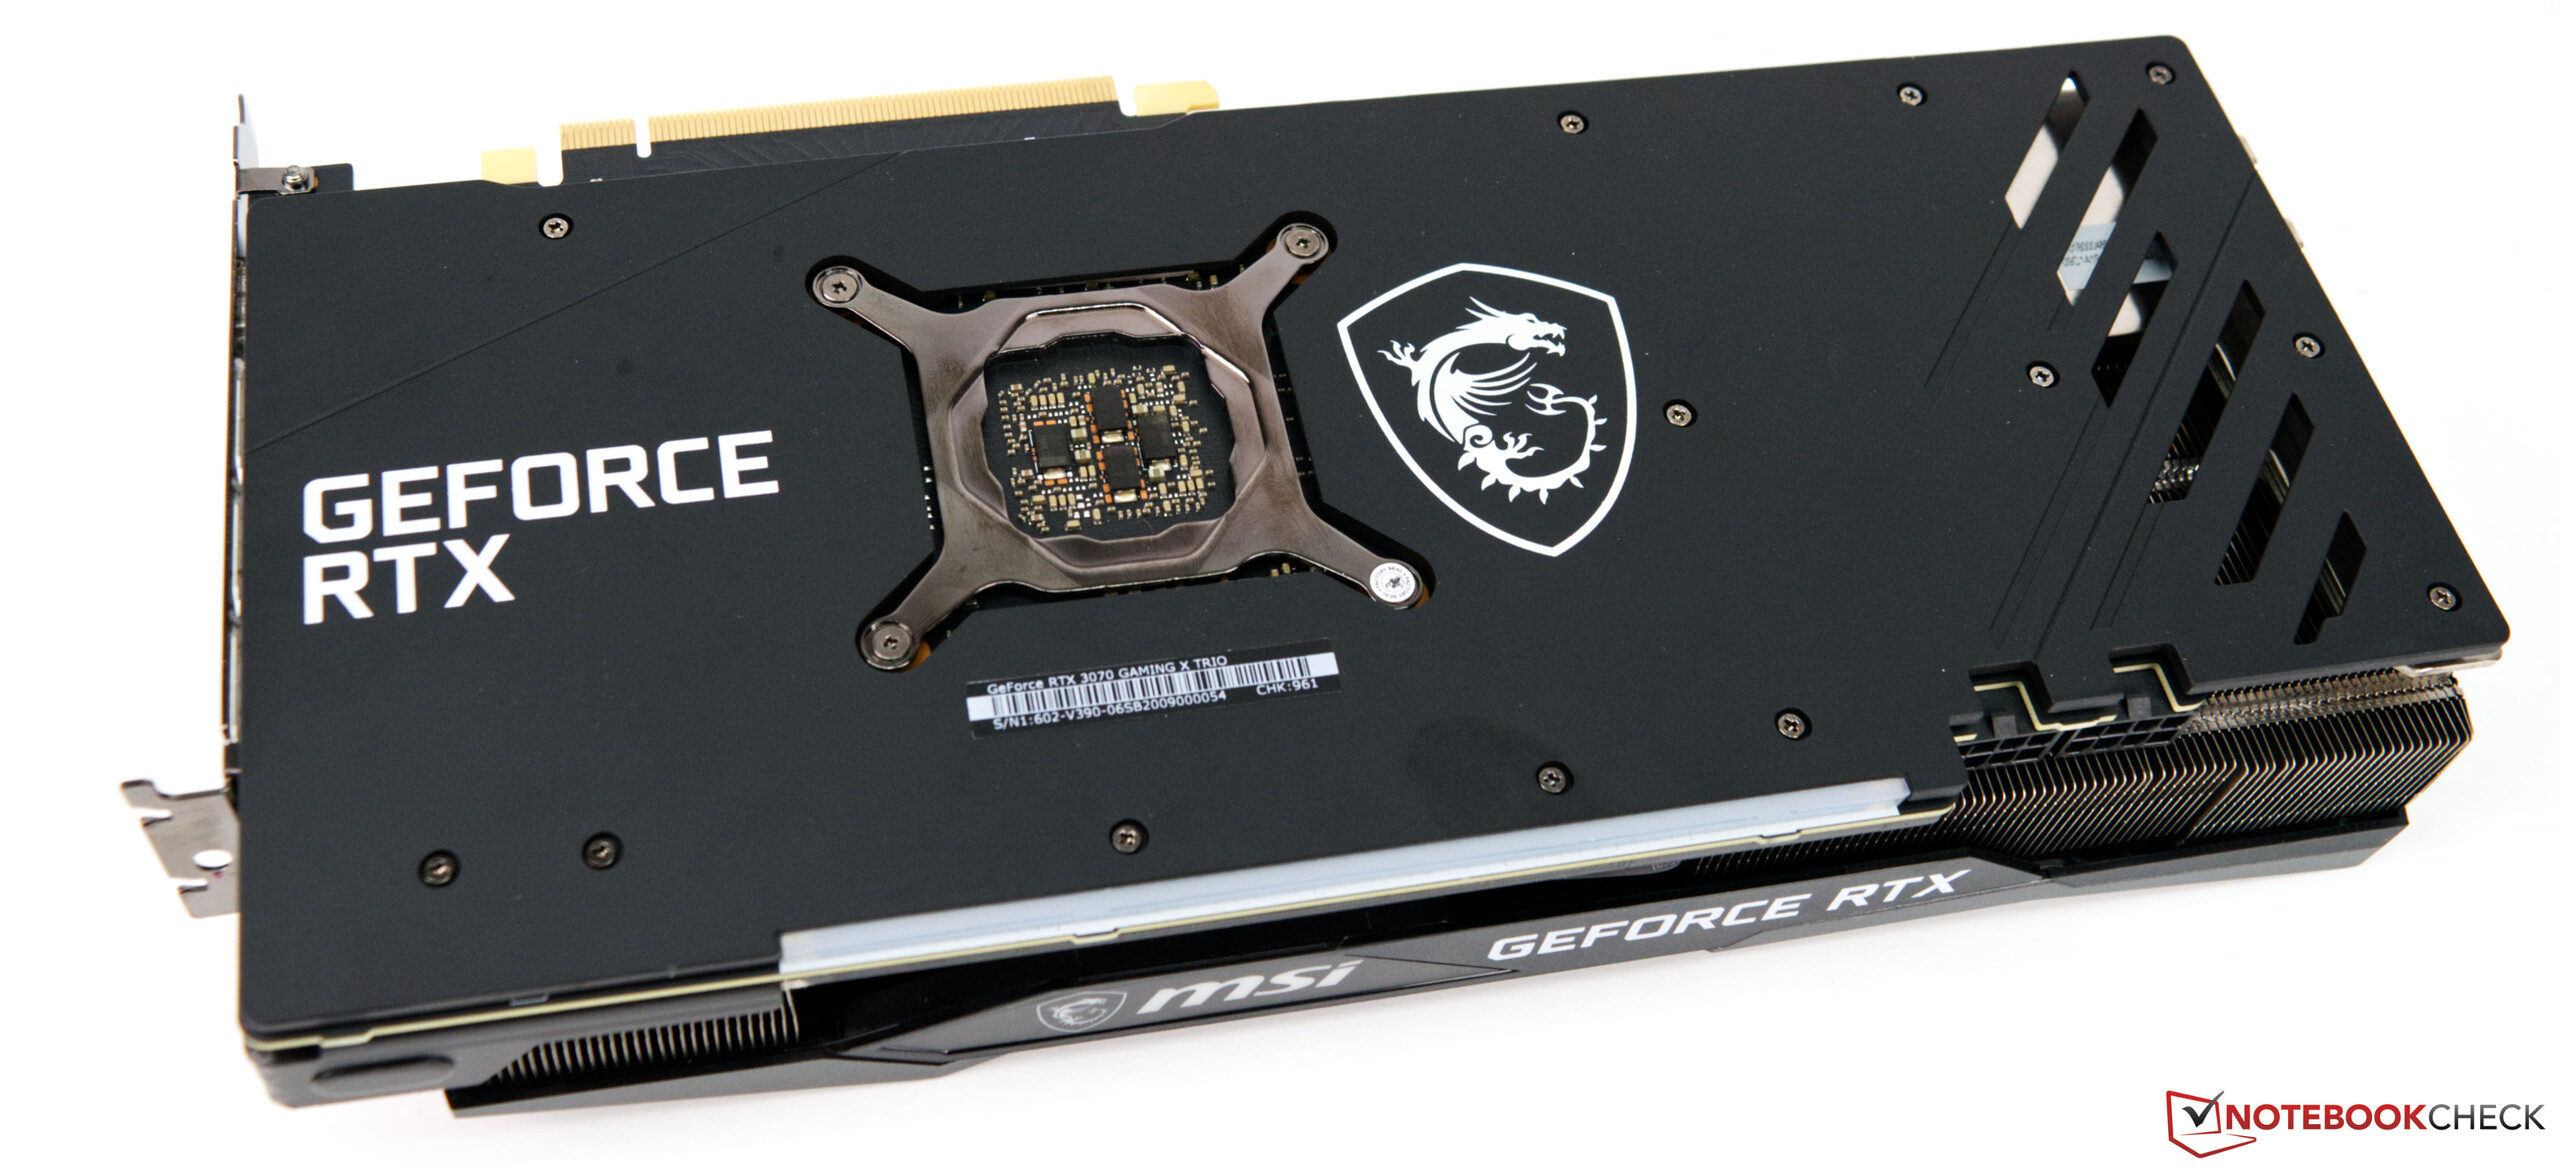 MSI GeForce RTX 3070 Gaming X Trio desktop graphics card in review 